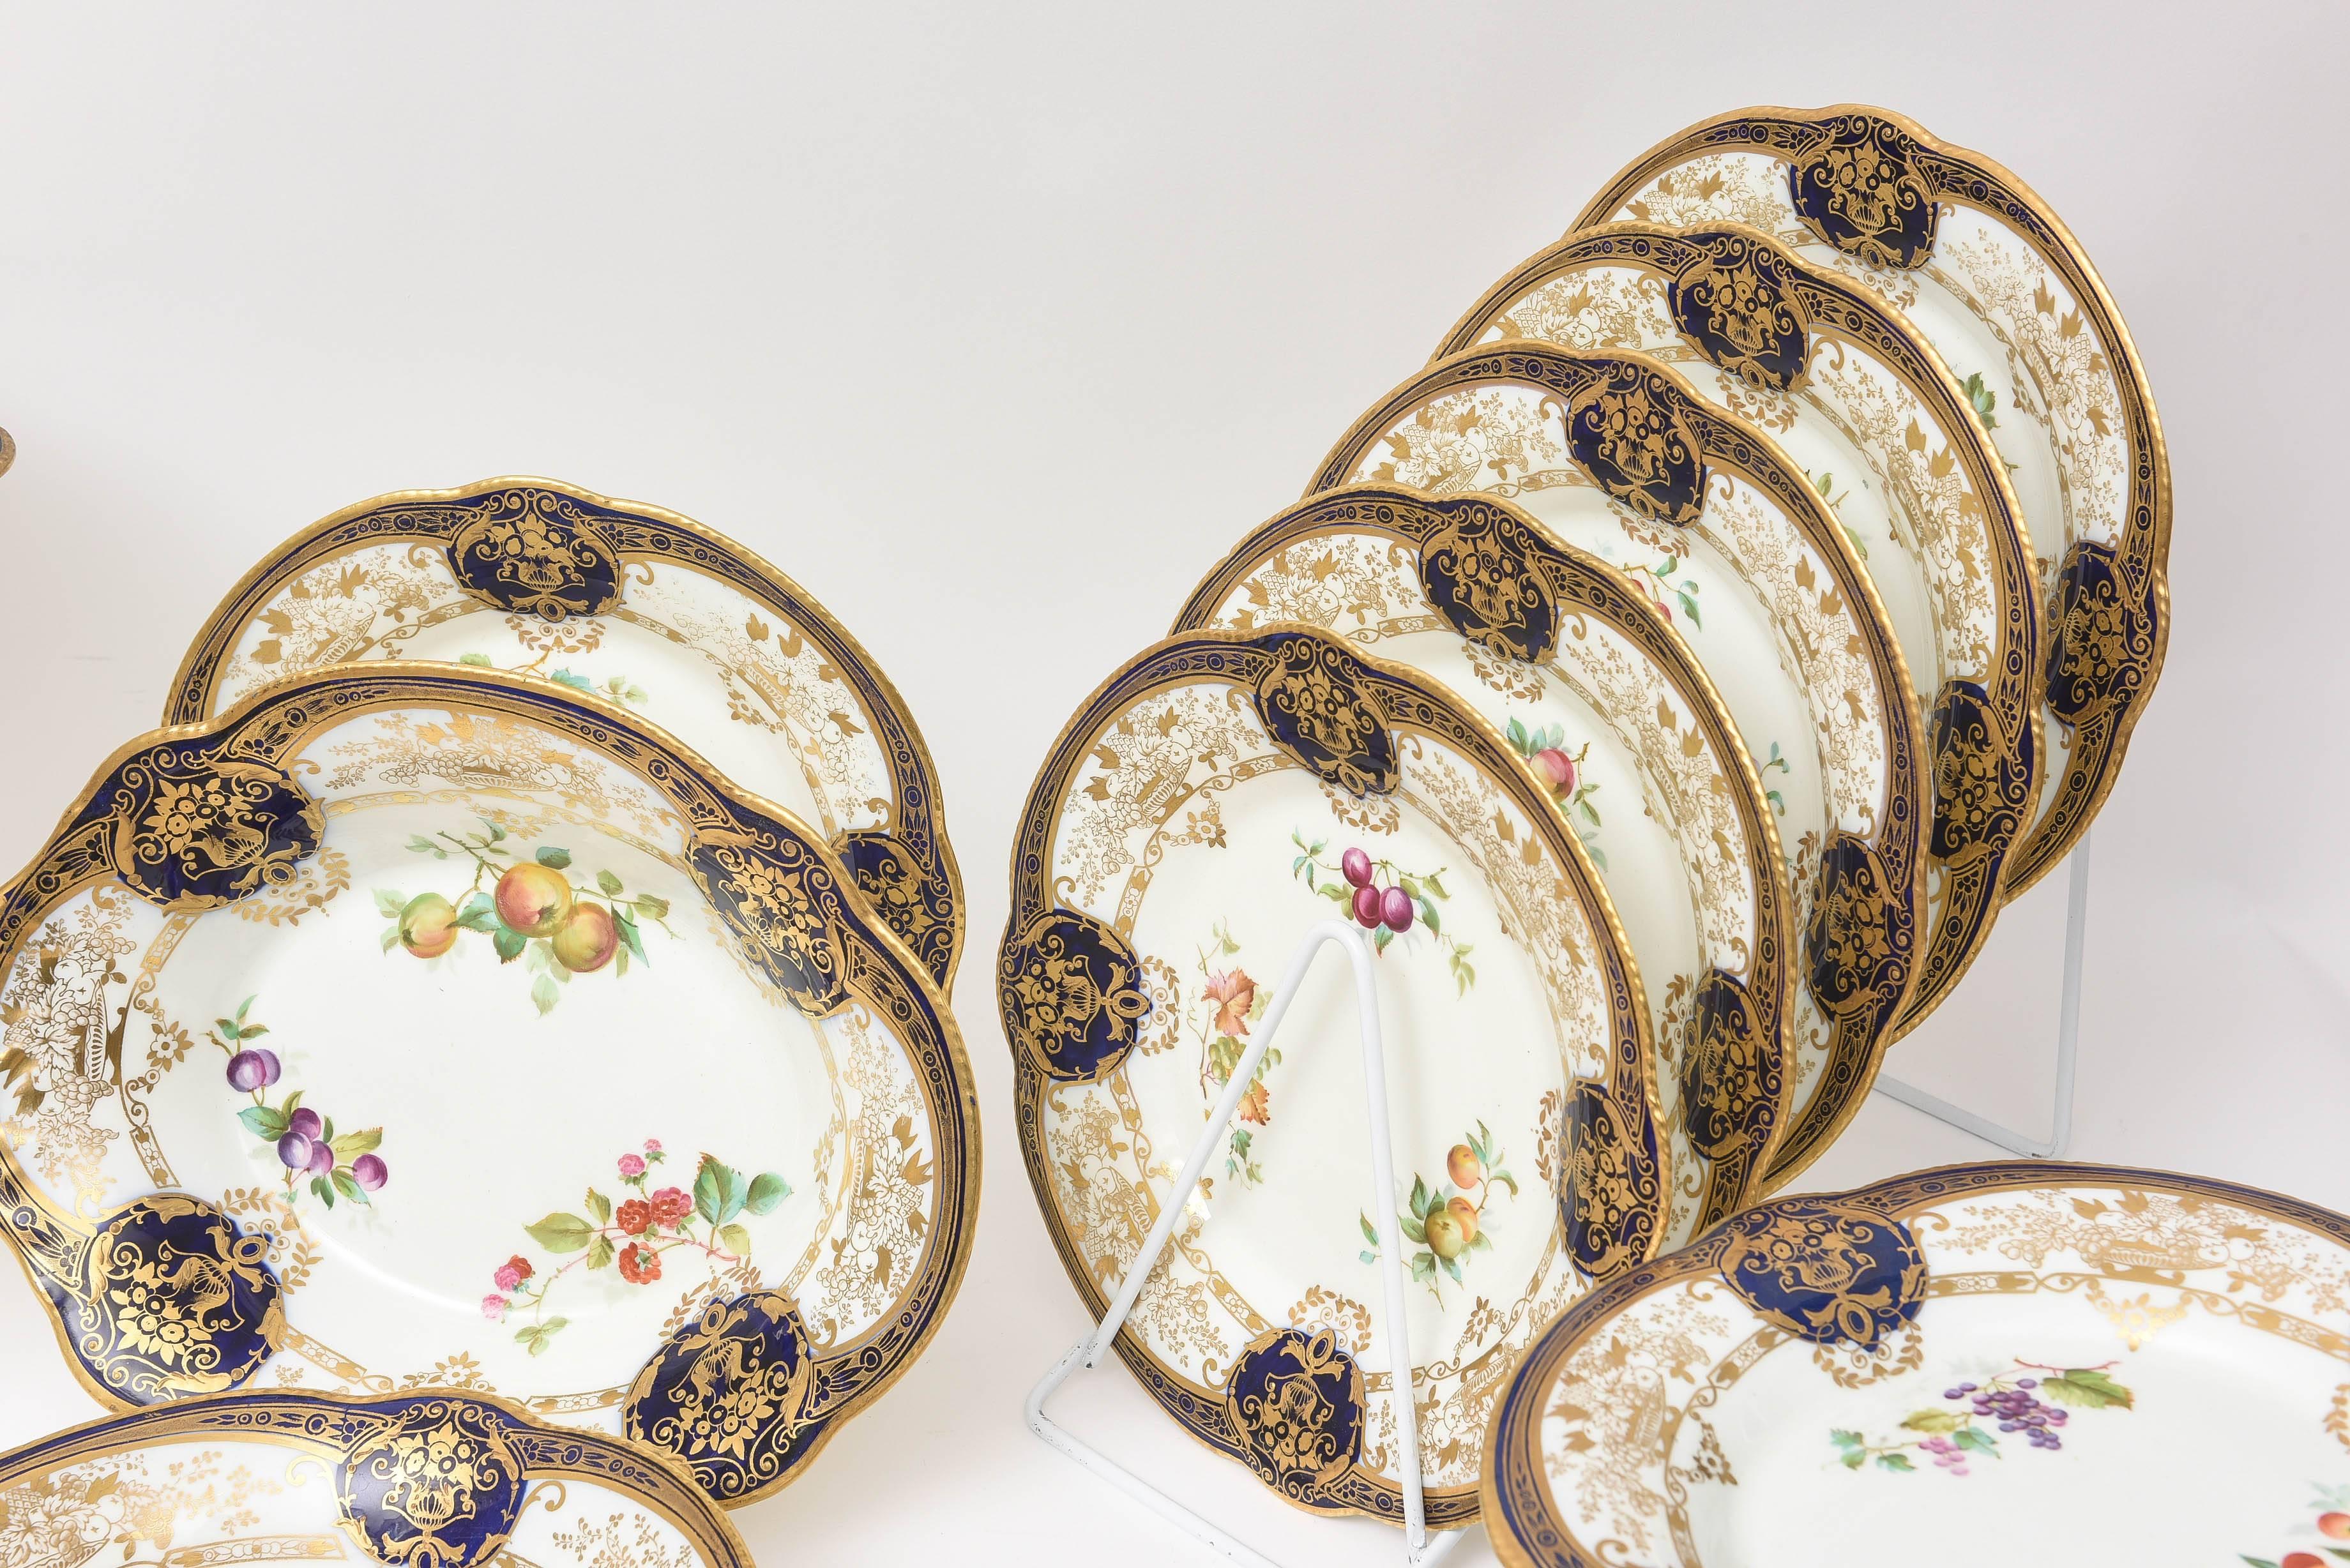 An elaborate and wonderful dessert service by a storied English porcelain firm: Adderly. Rich cobalt blue edges and cartouches, hand decorated 24-karat gilt throughout and hand-painted florals and fruits make this service especially beautiful.